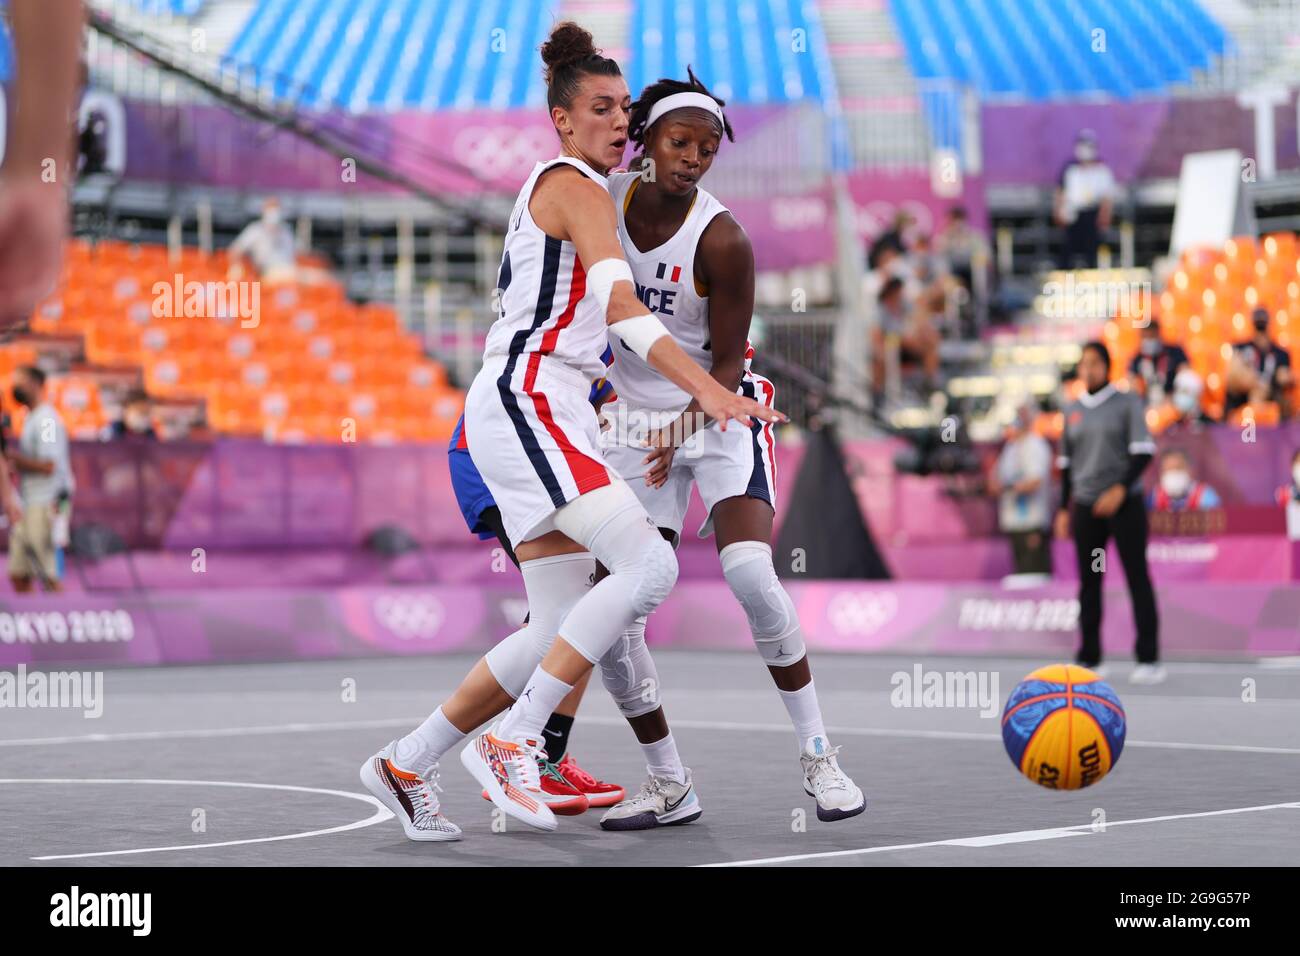 Tokyo, Japan. 26th July, 2021. (L to R) Laetitia Guapo, Mamignan Toure (FRA) 3x3 Basketball : Men's Pool round match between Japan 16-19 ROC during the Tokyo 2020 Olympic Games at the Aomi Urban Sports Park in Tokyo, Japan . Credit: Naoki Morita/AFLO SPORT/Alamy Live News Stock Photo